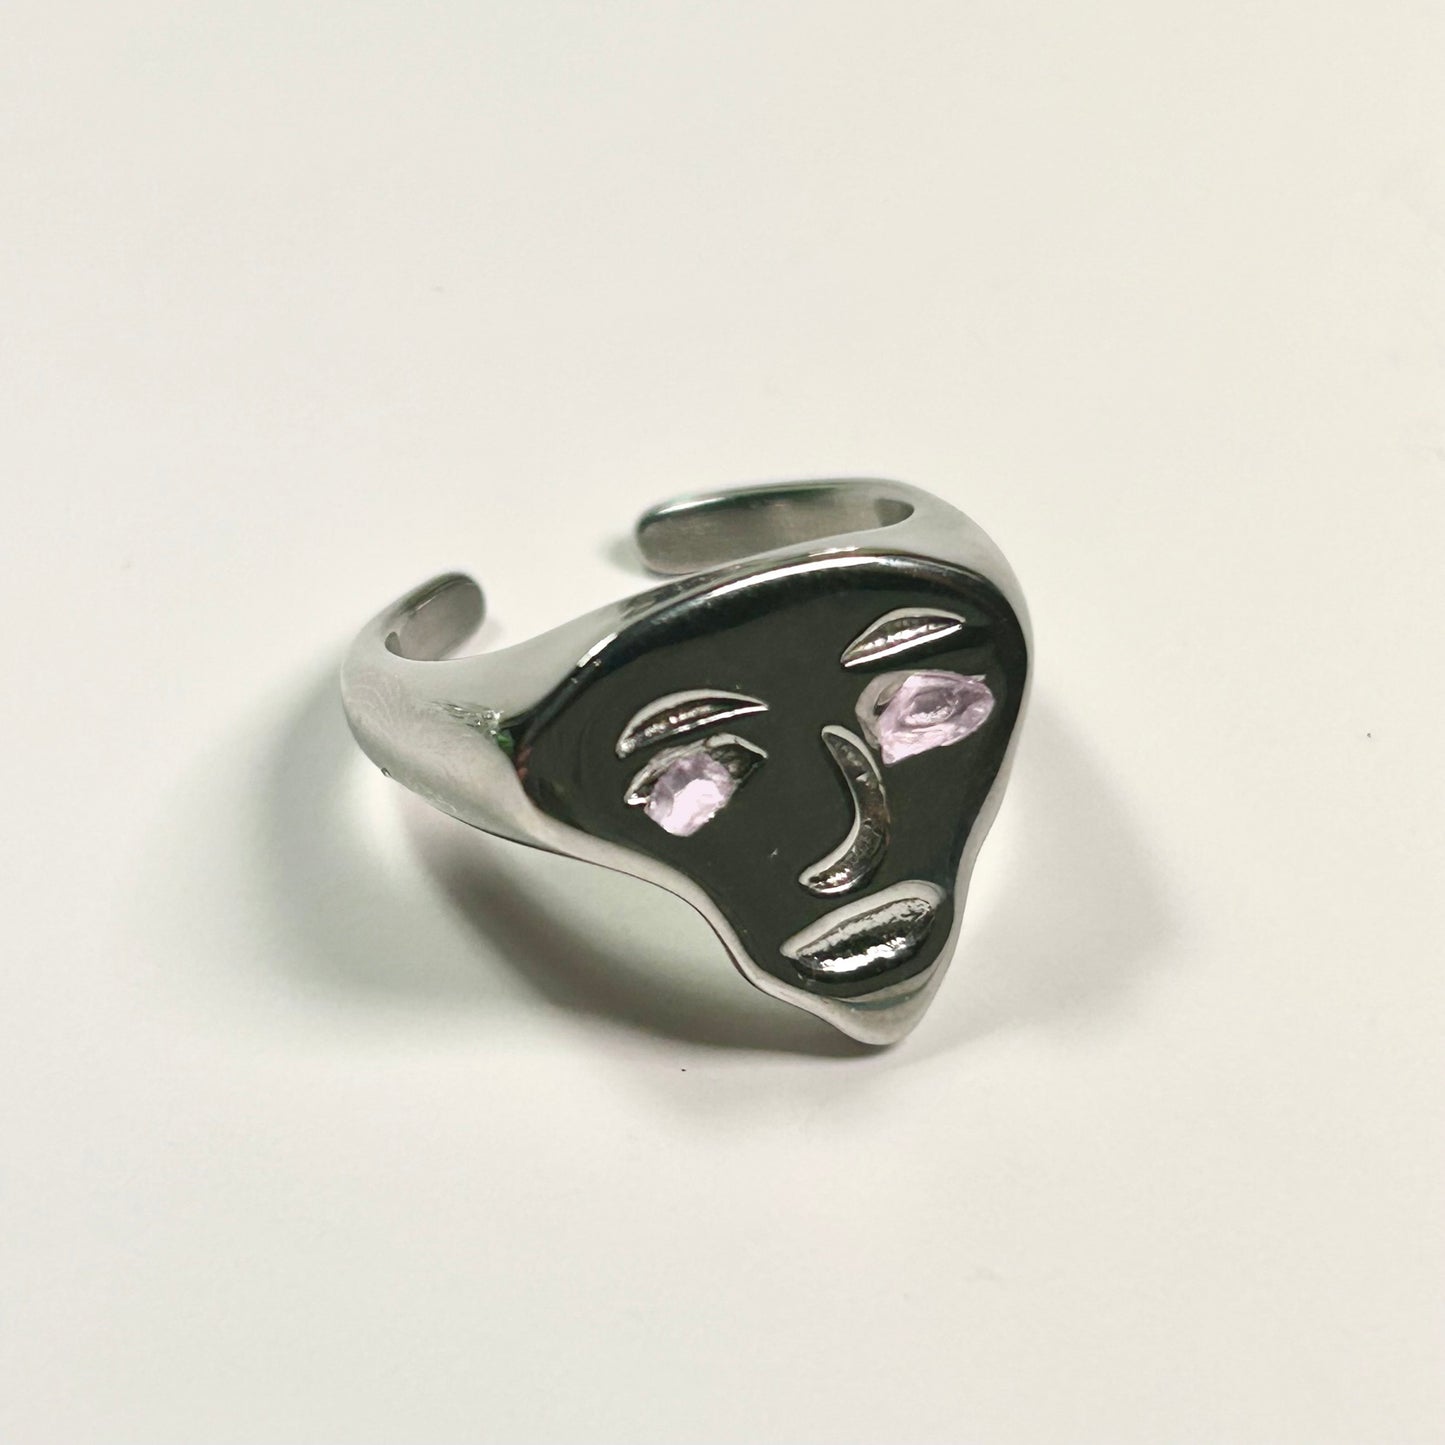 Plastered Face Ring (LIMITED EDITION)